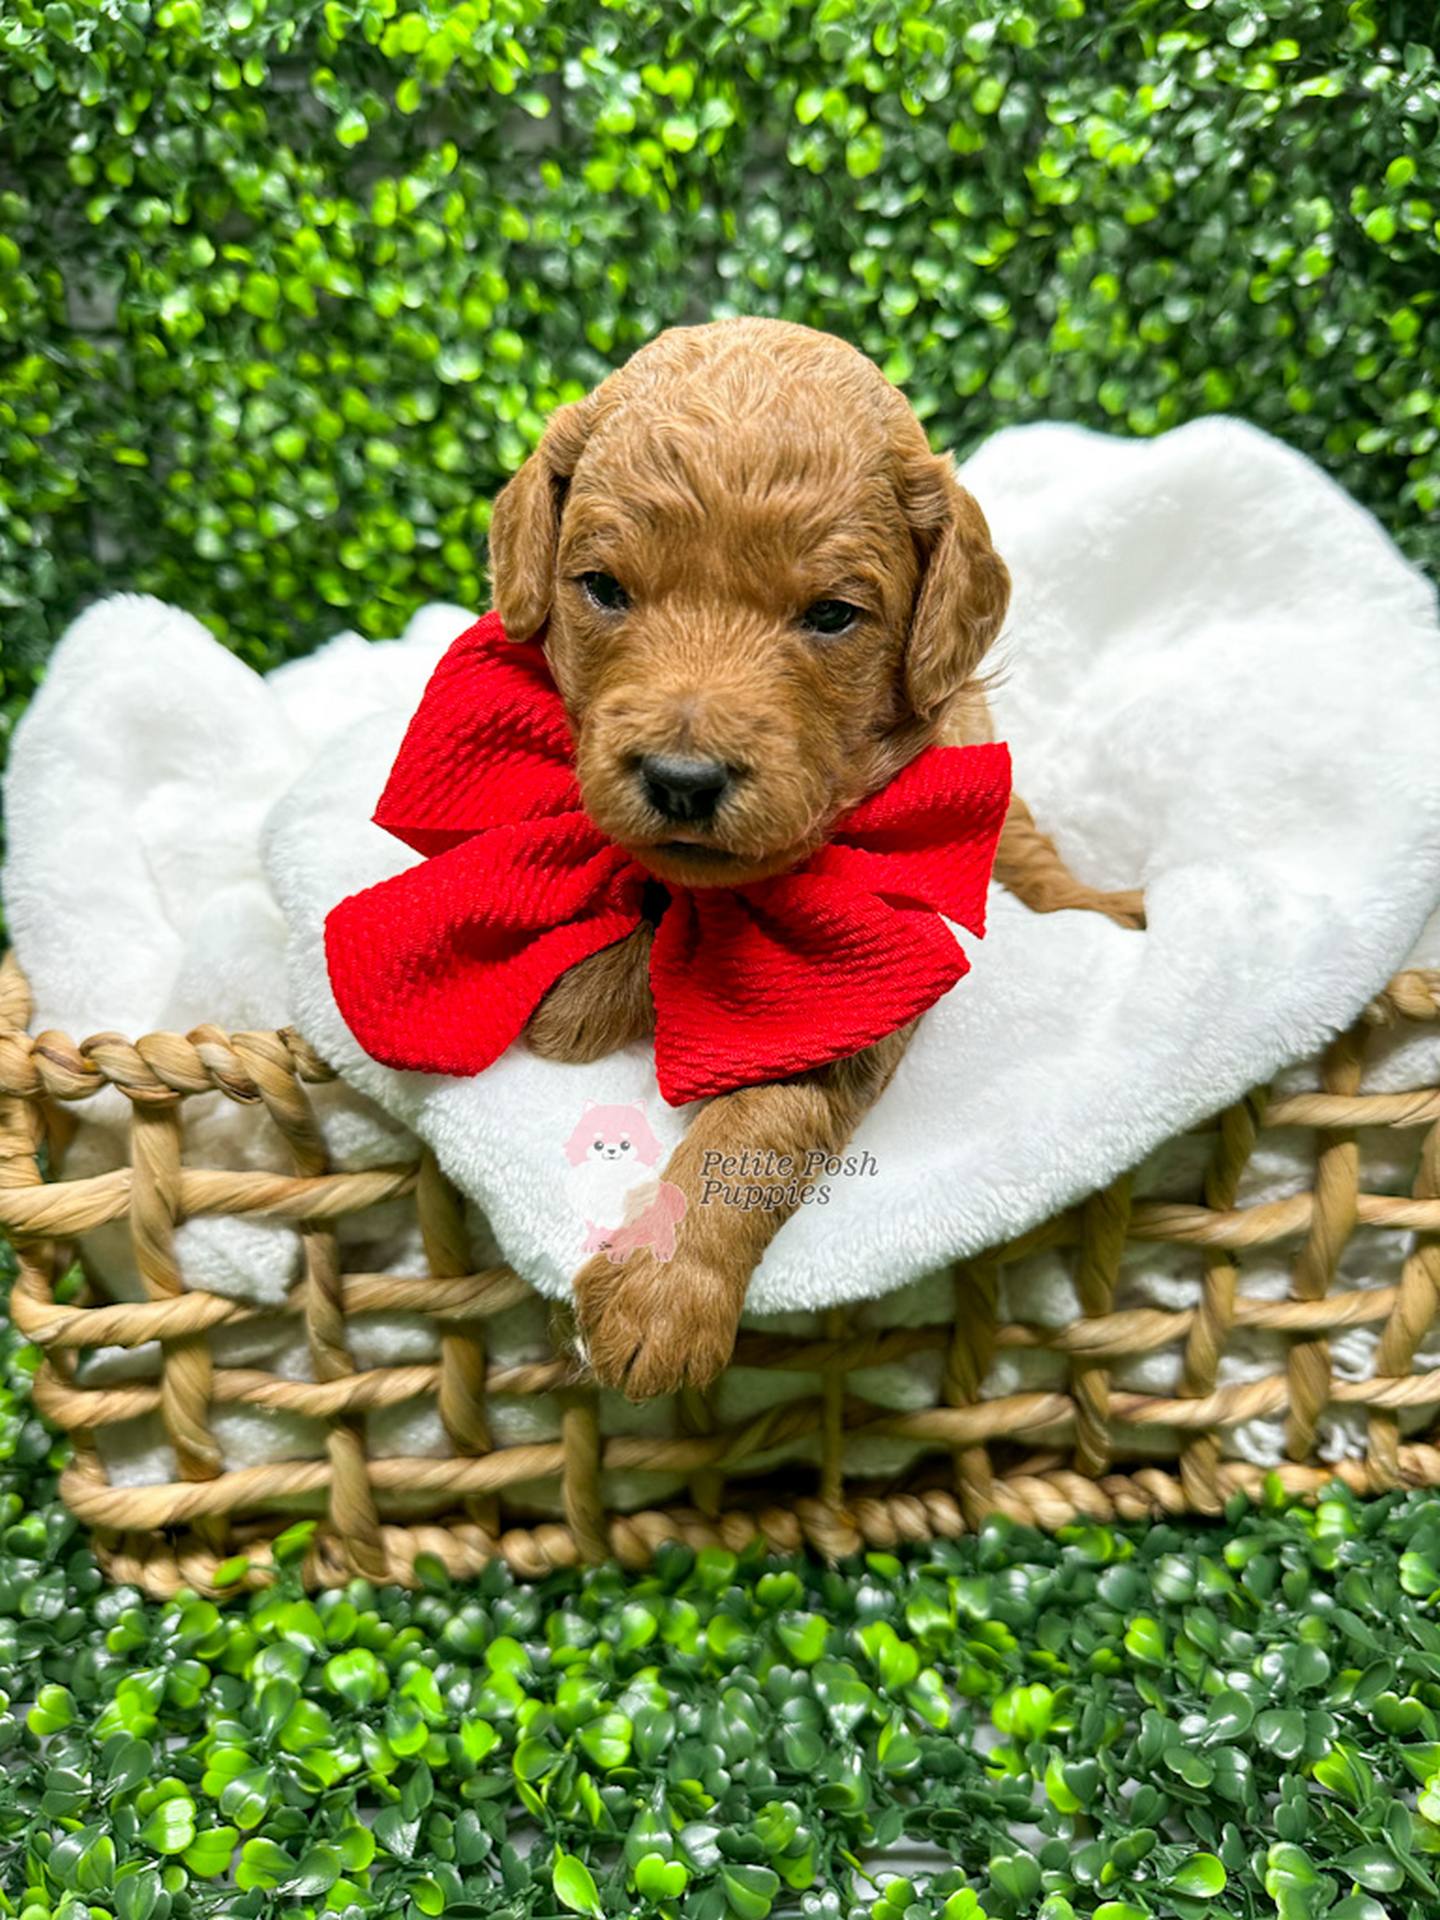 Romeo-Red-Apricot-FB-Toy-Goldendoodle-Petite-Posh-Puppies-